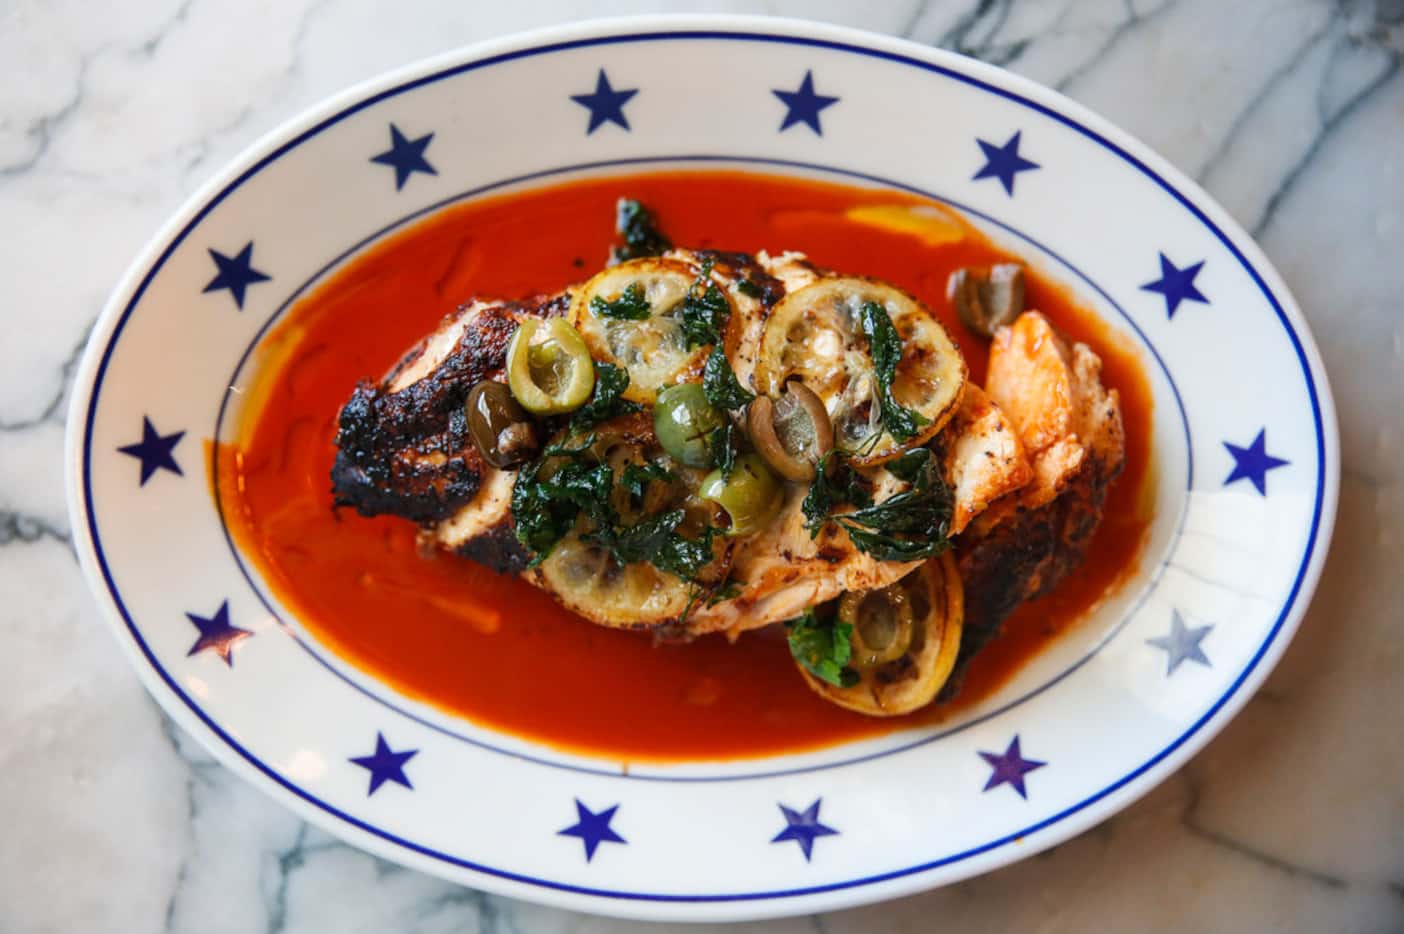 Chicken Diavolo is pictured at The Charles.